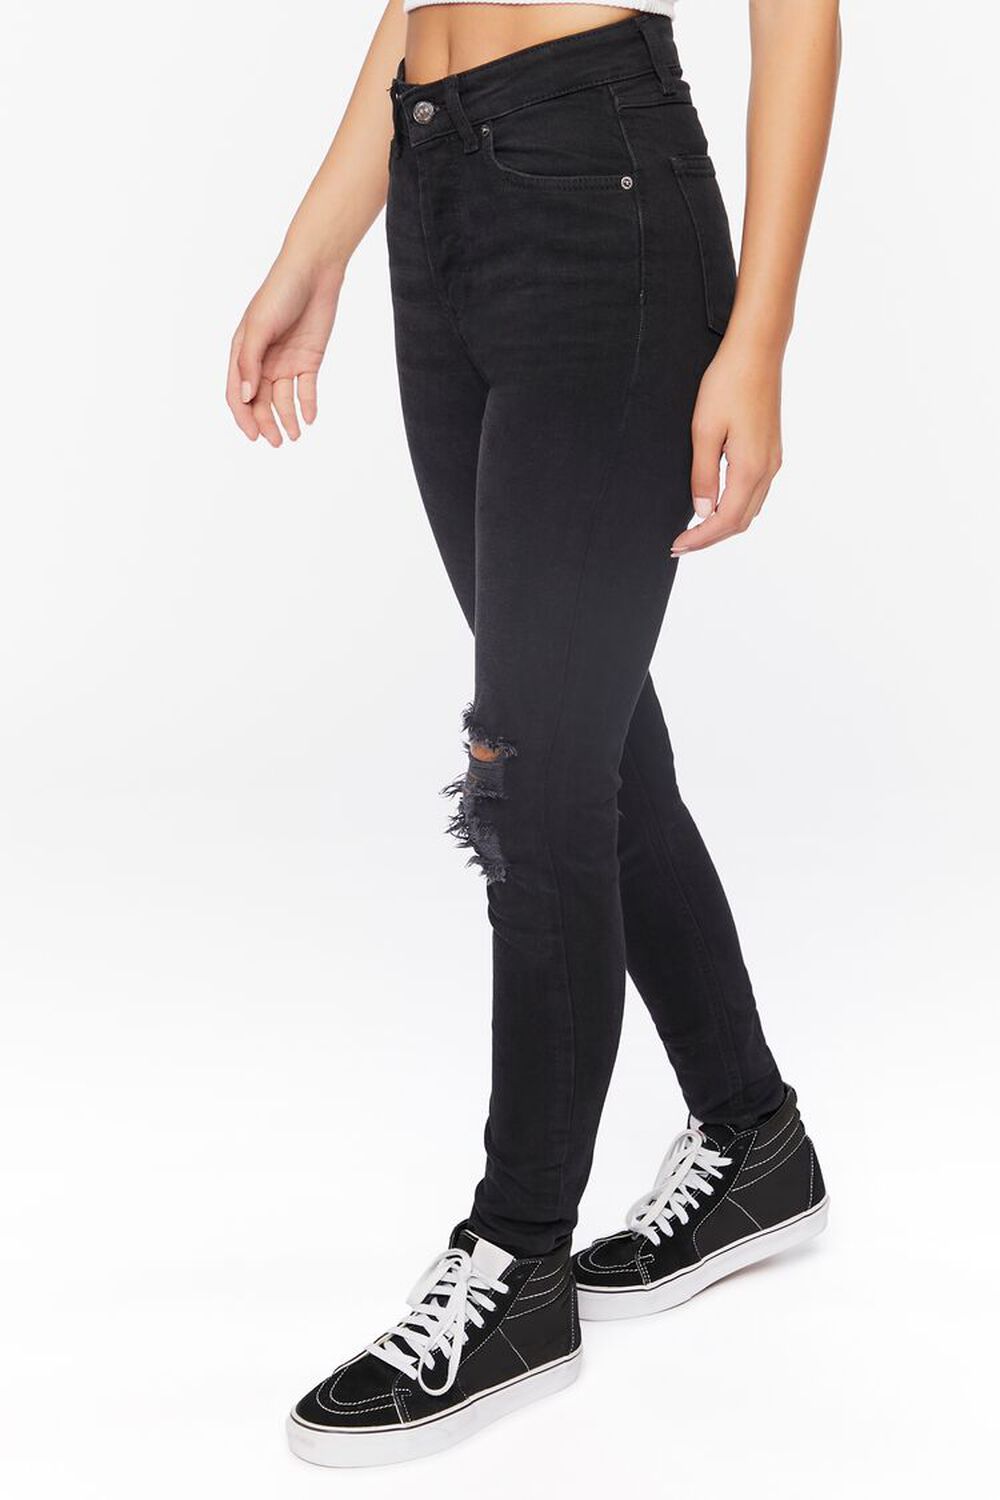 WASHED BLACK Recycled Cotton High-Rise Distressed Jeans, image 3